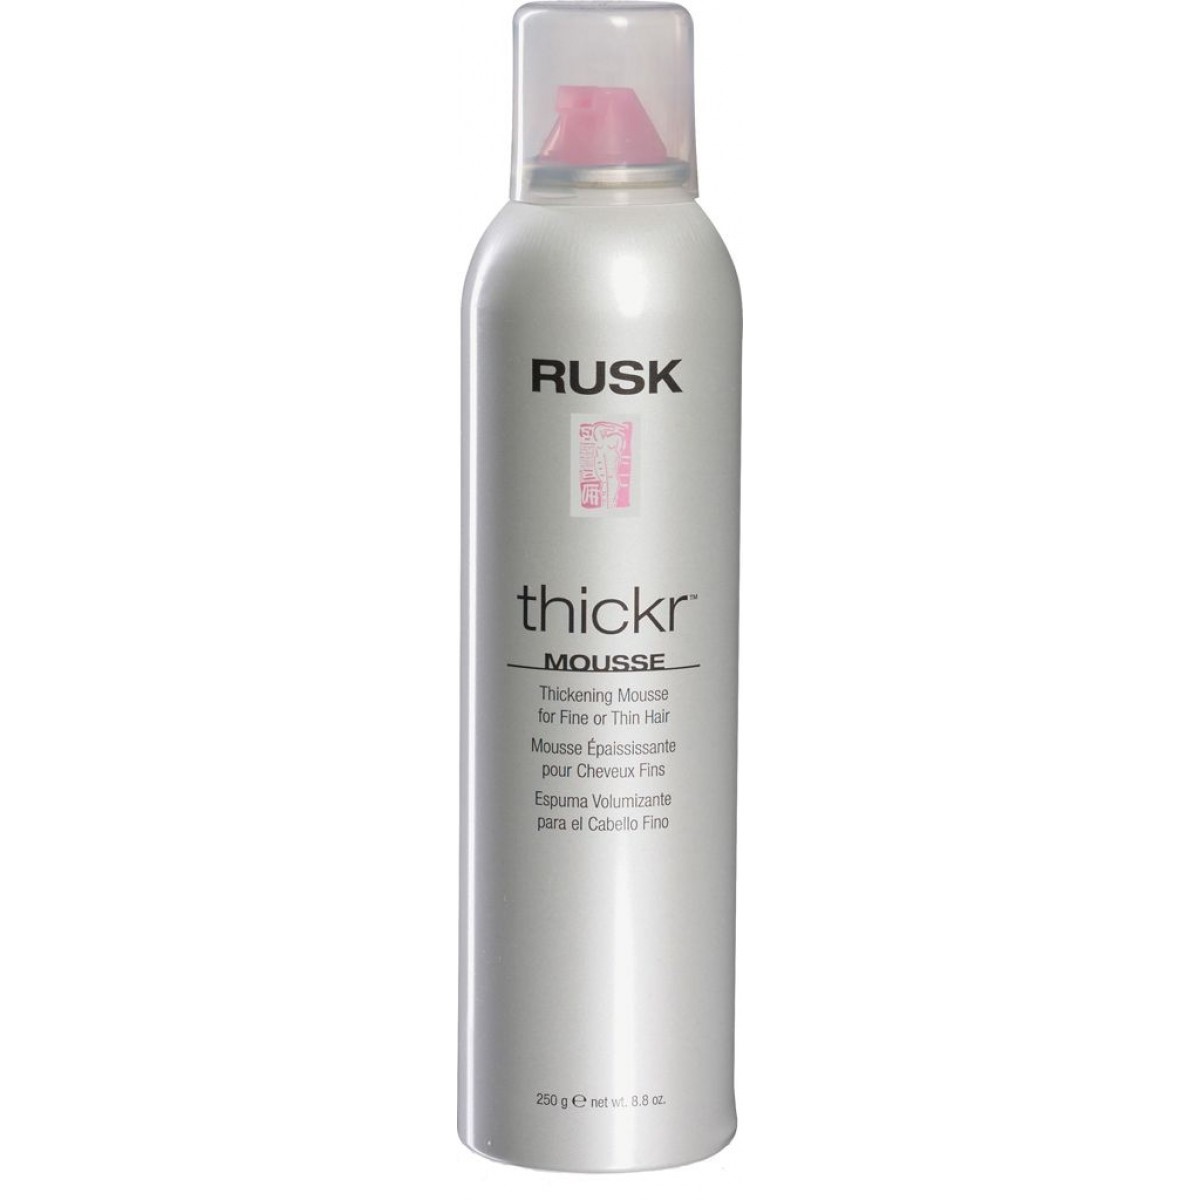 Thickr Thickening Mousse 8.8 Oz